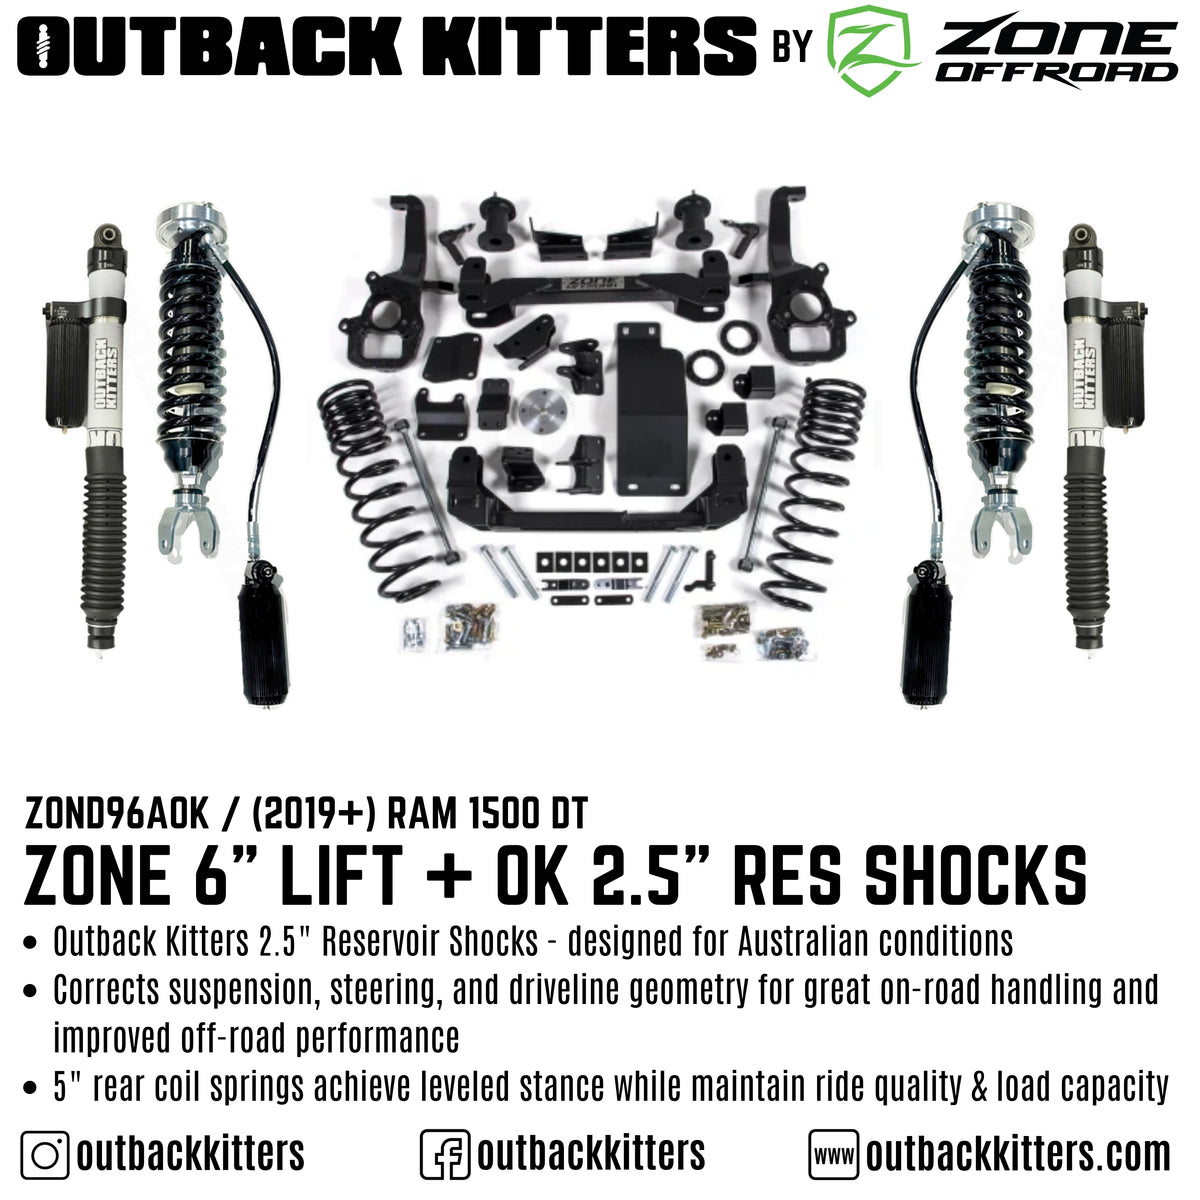 OK by Zone Offroad 6" Lift Kit for 2019+ Ram 1500 DT - Outback Kitters